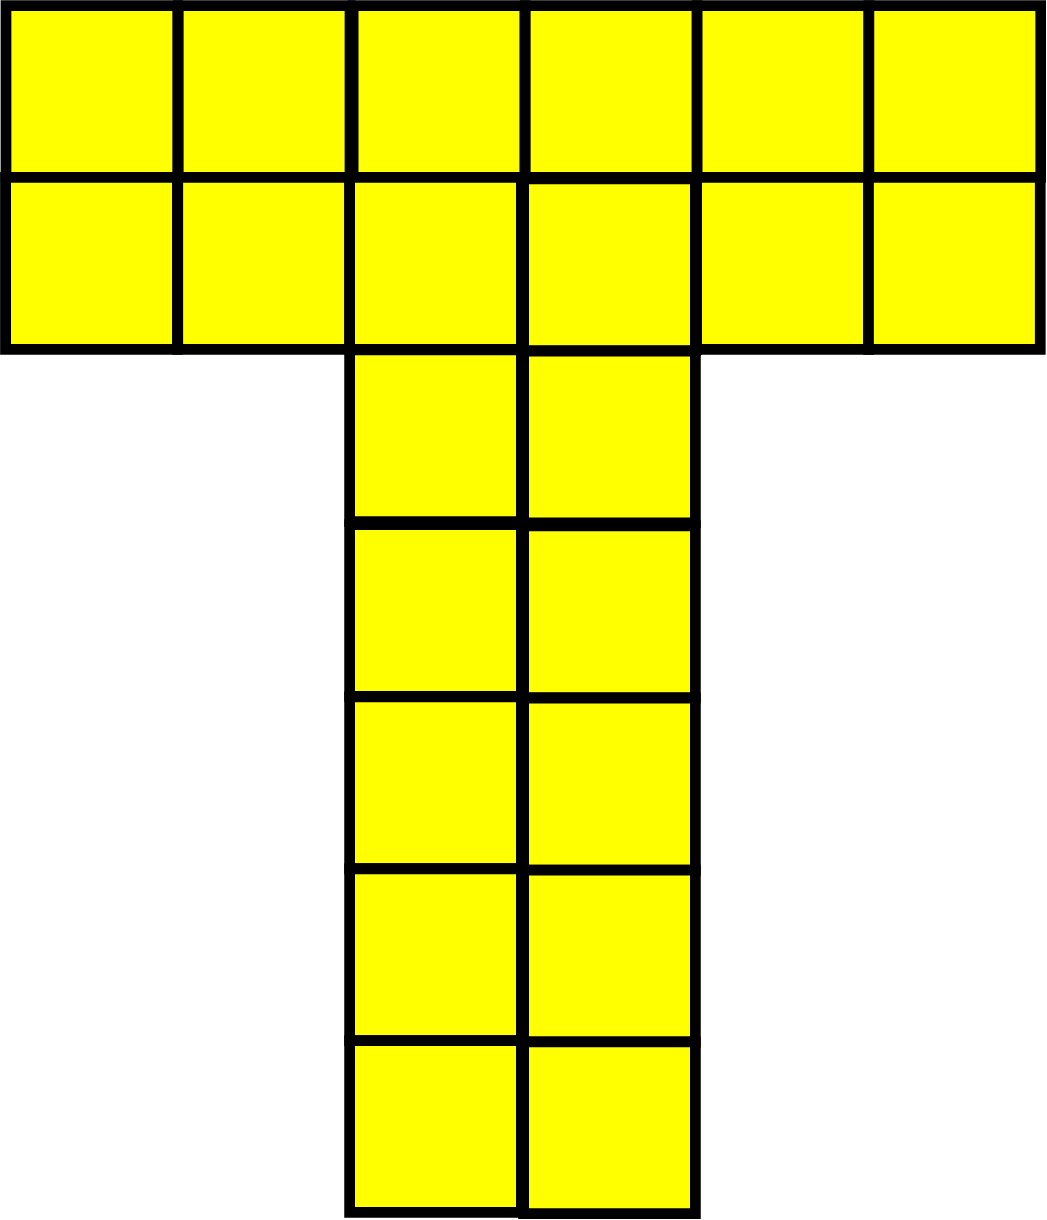 22 square yellow tiles laid out in the shape of a T.